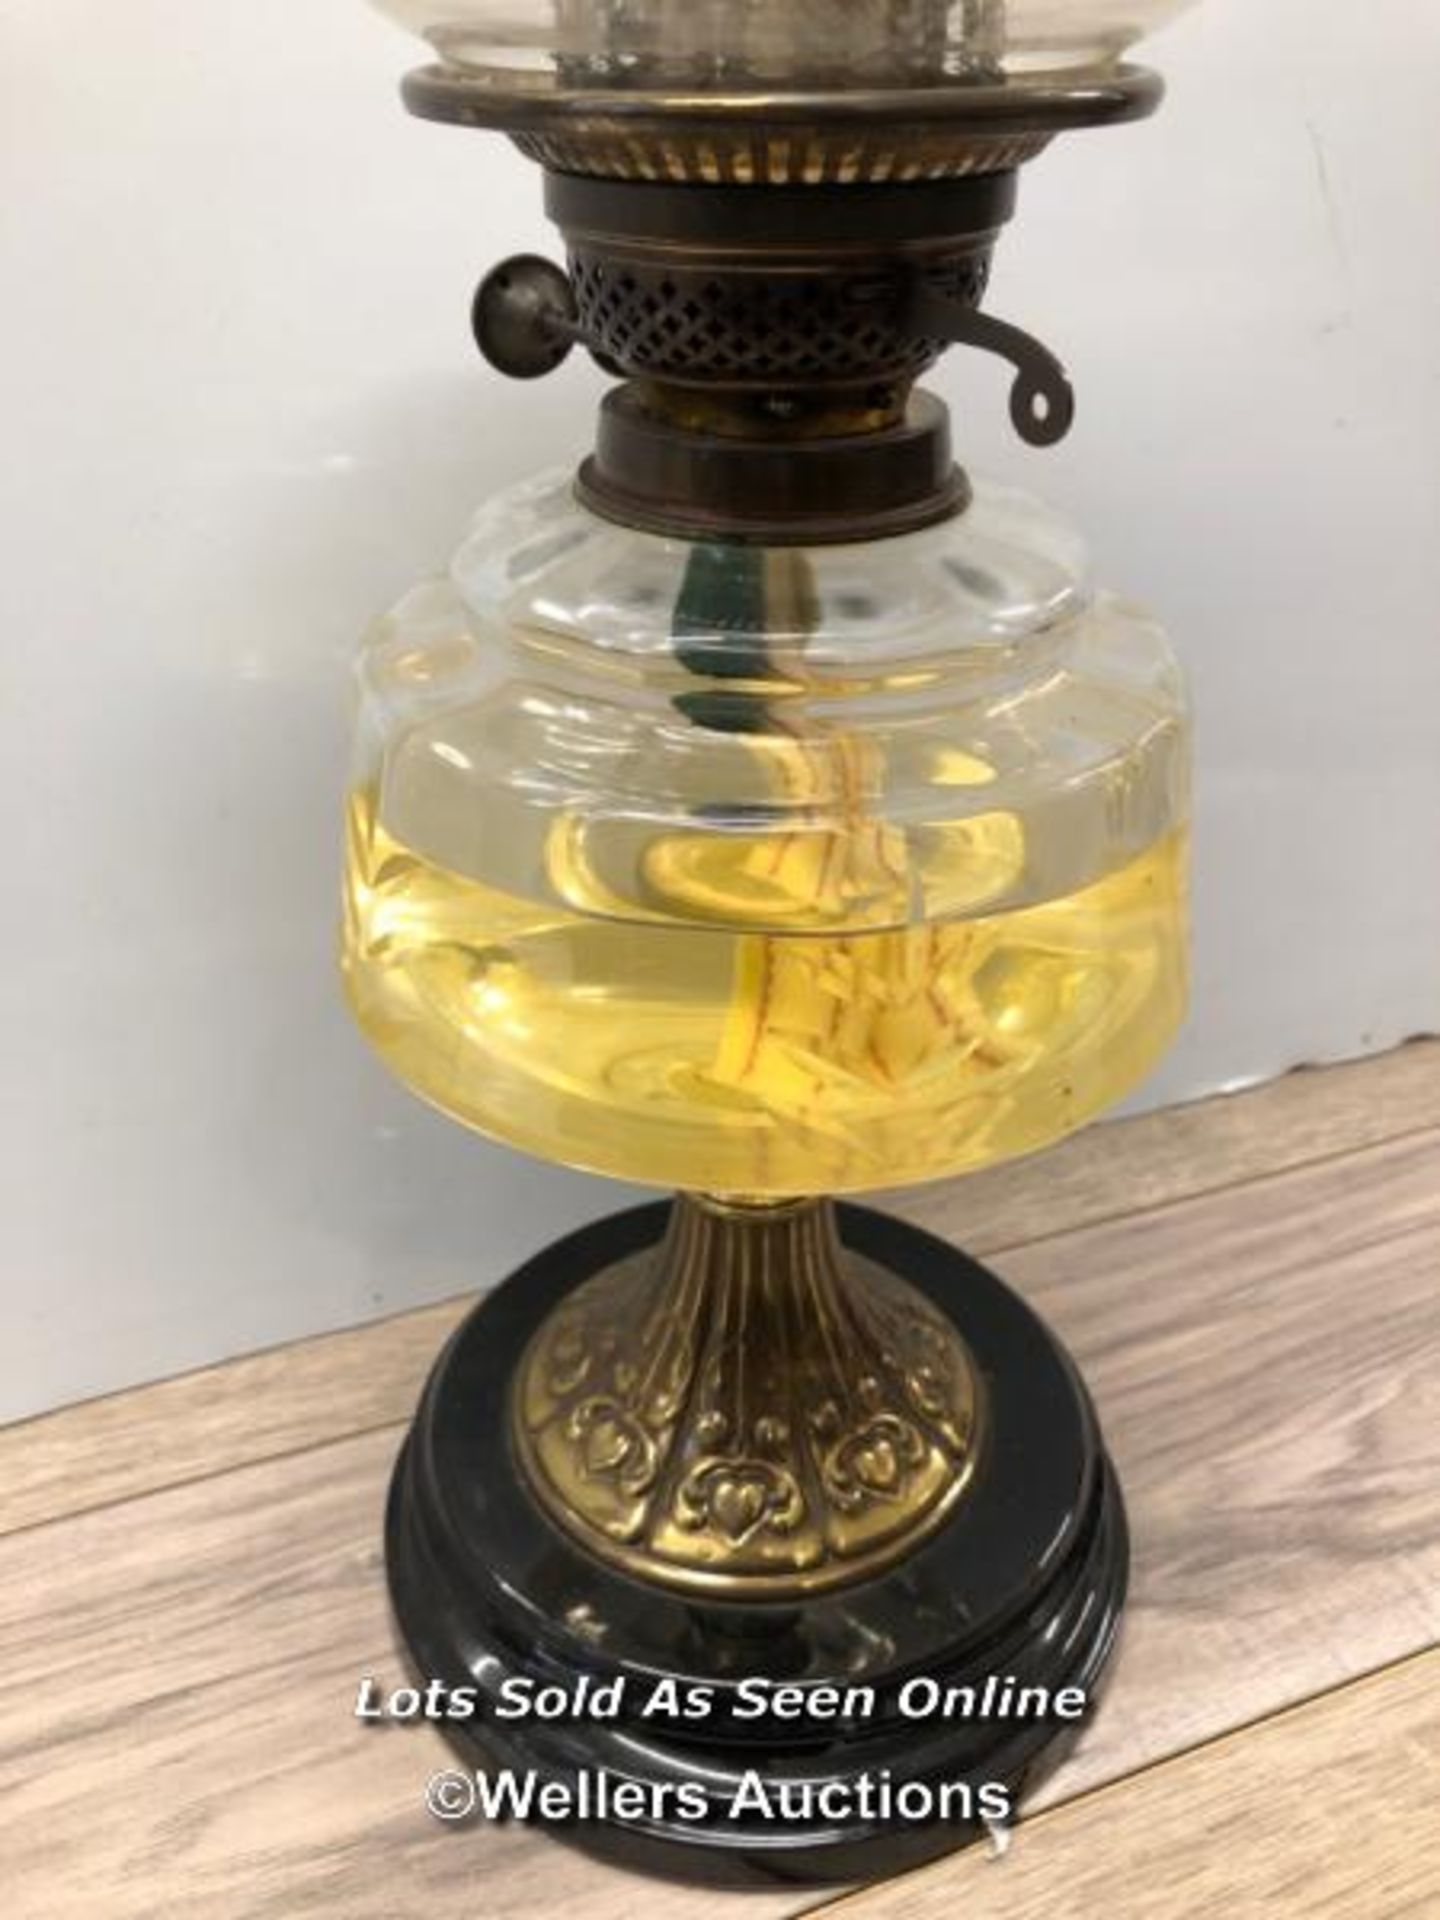 OIL LAMP, ETCHED GLASS SHADE, GLASS RESERVOIR AND BRASS BASE - Image 2 of 4